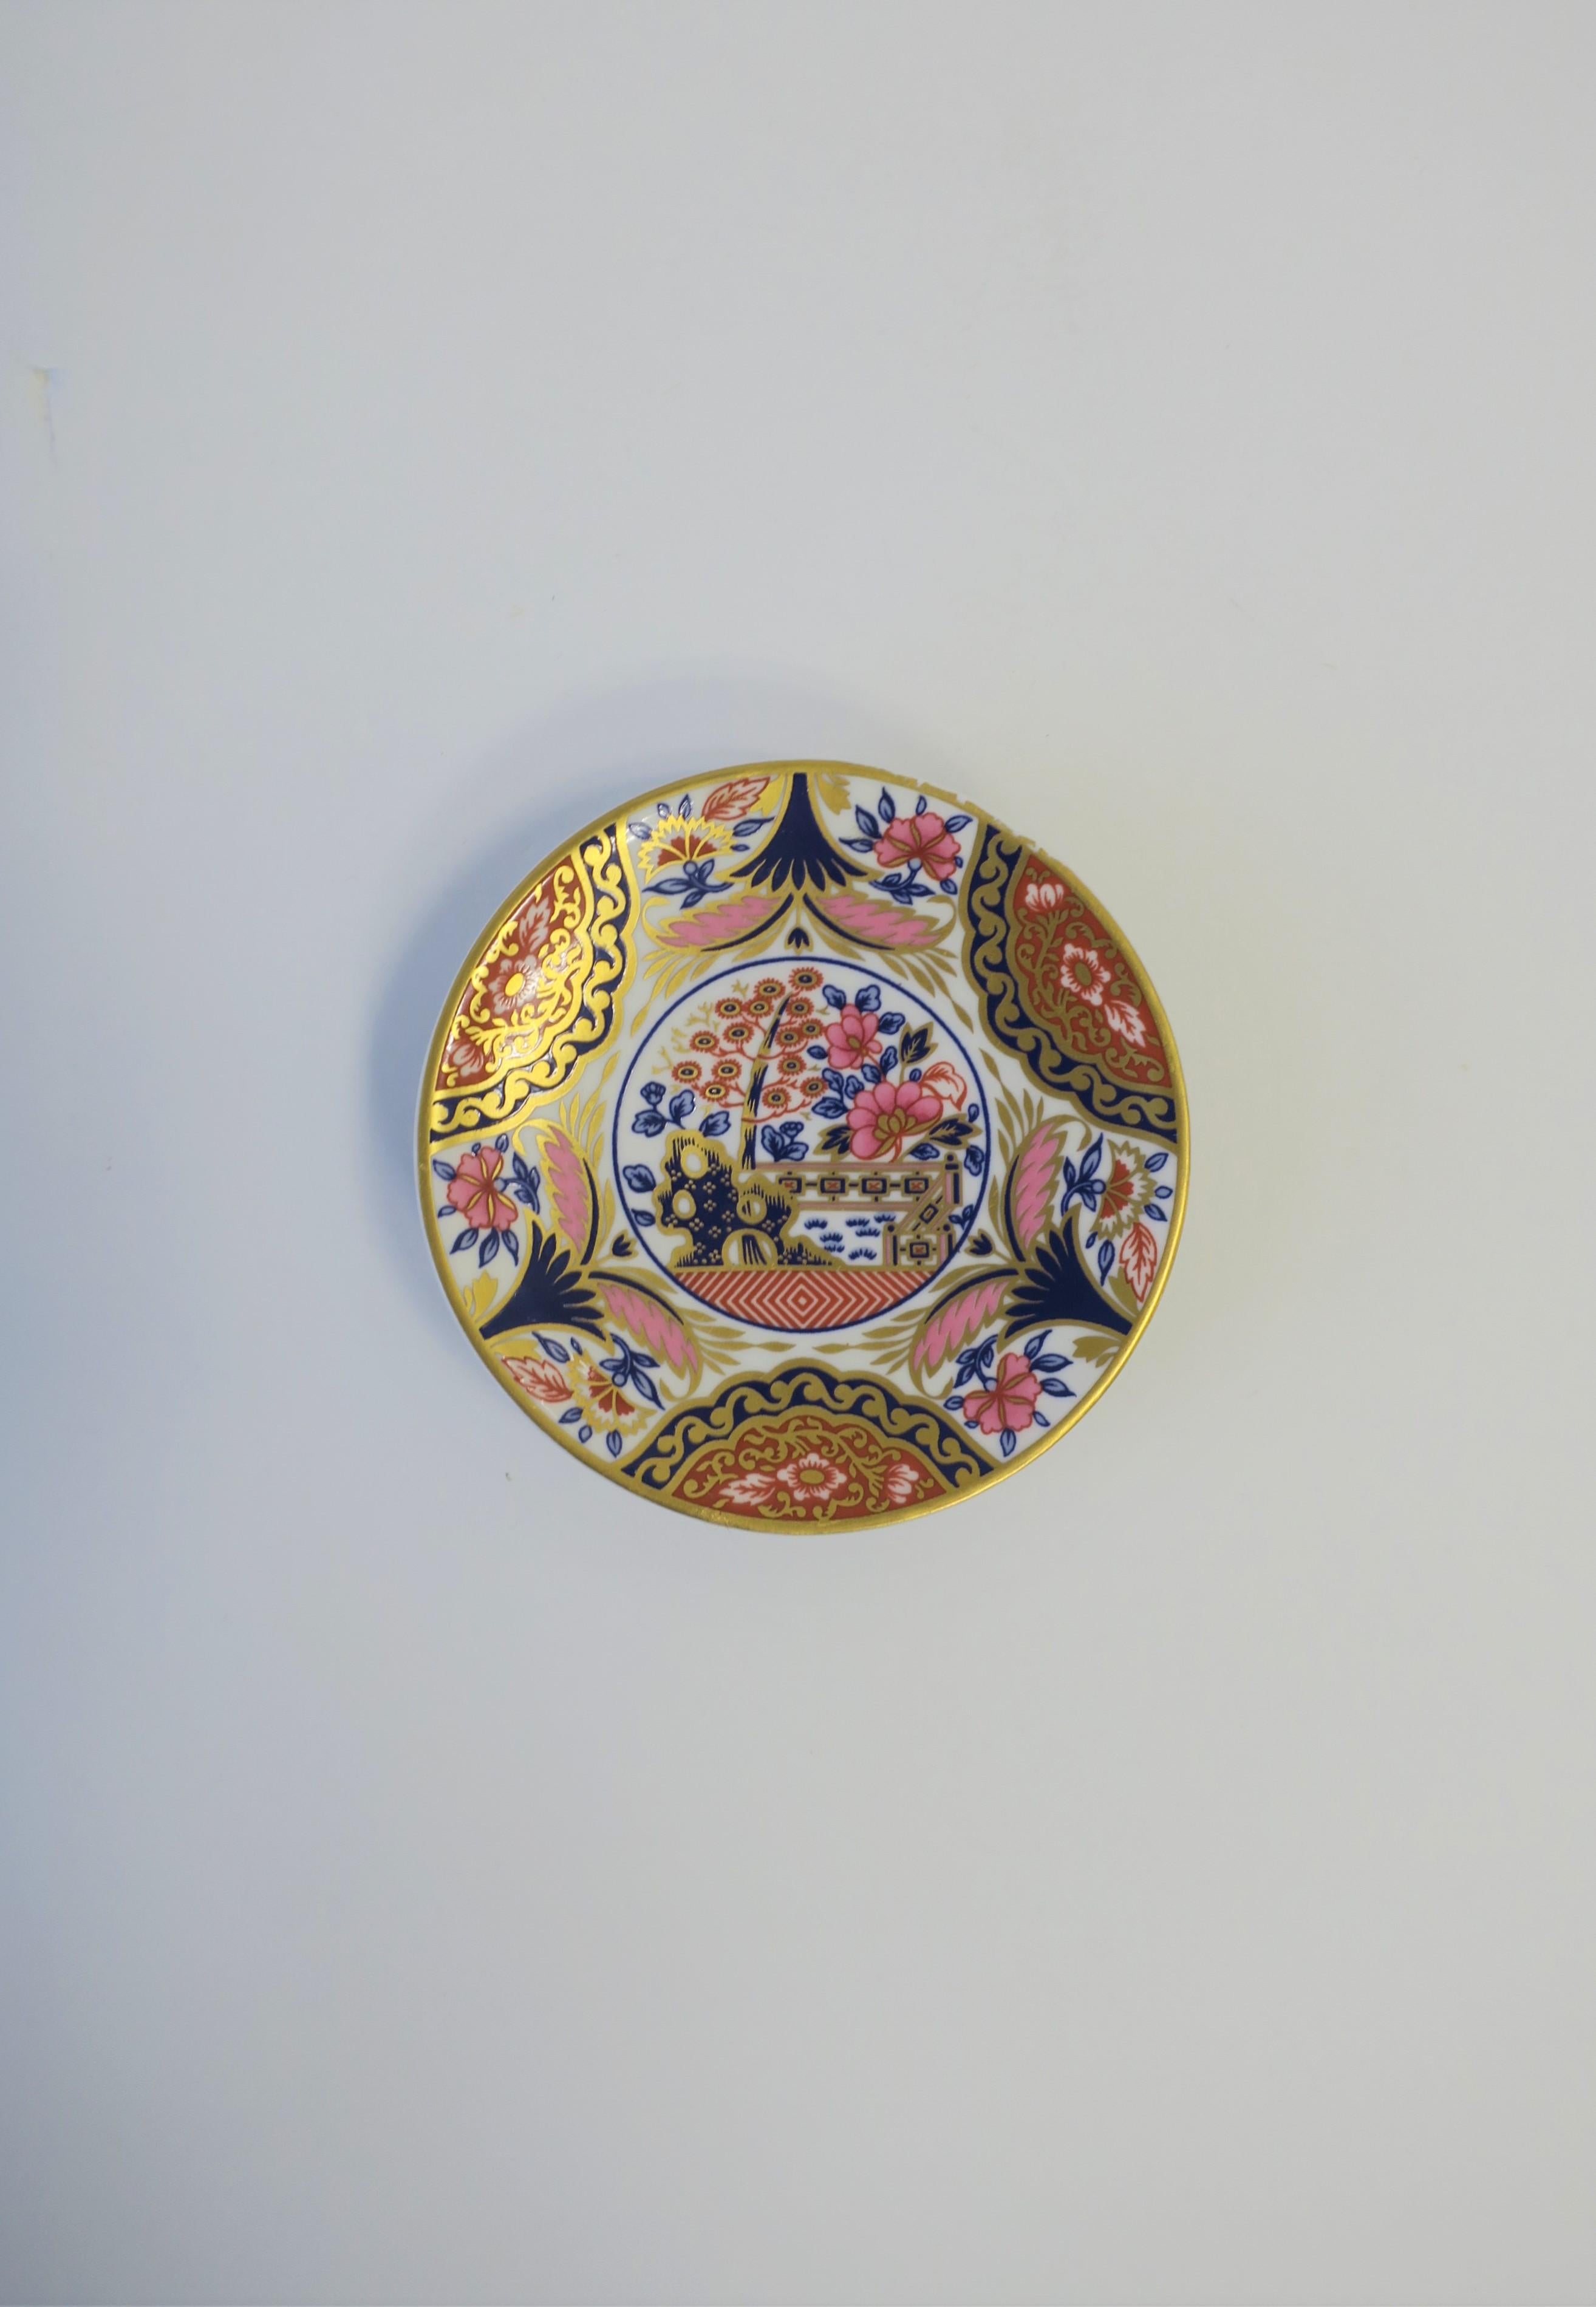 English Spode Blue White Gold Porcelain Jewelry Dish with Chinoiserie Design In Good Condition For Sale In New York, NY